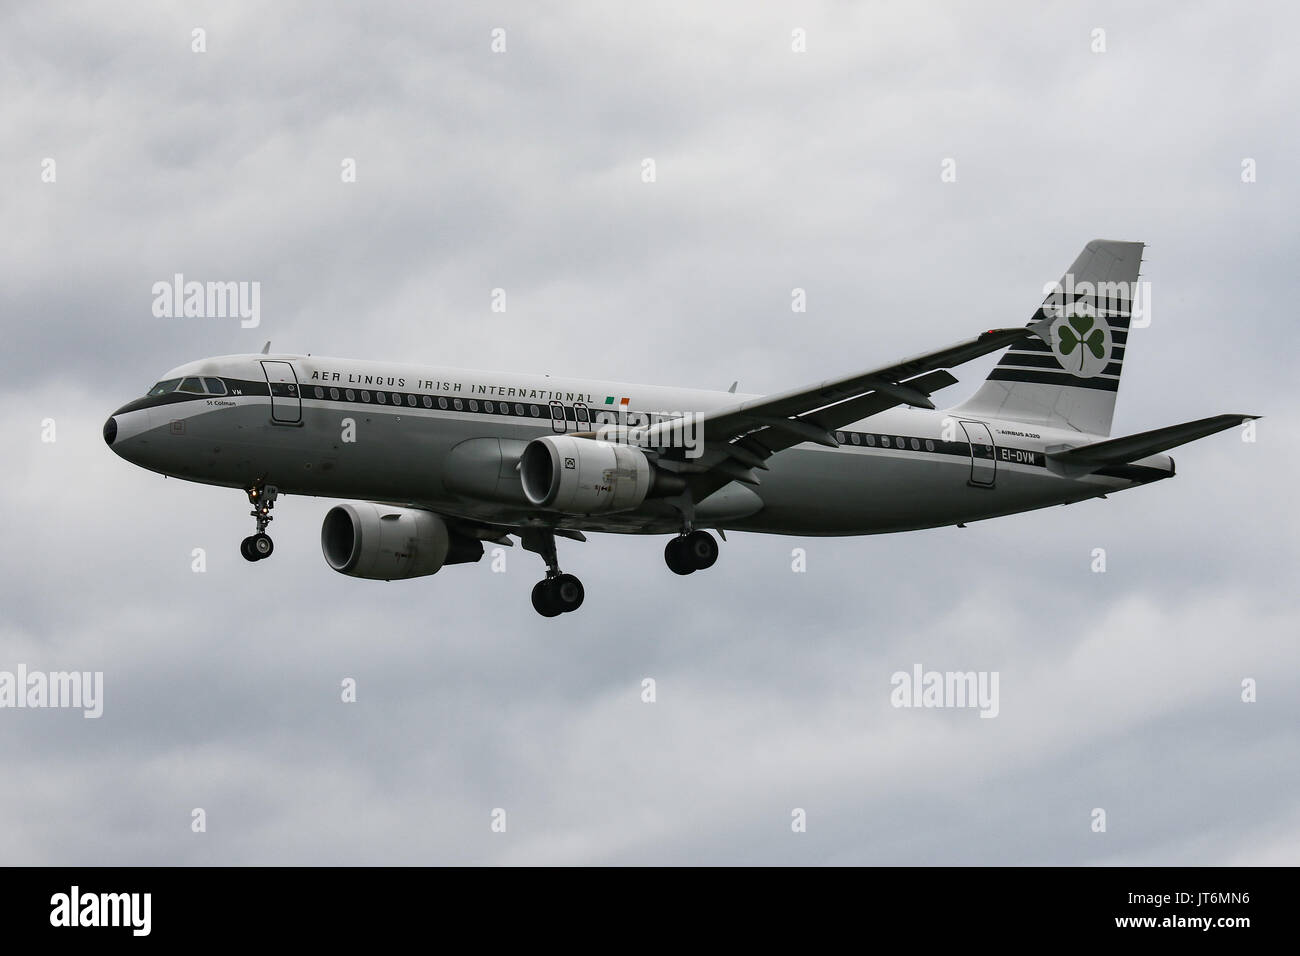 An Aer Lingus Airbus A320 ,wearing a special retro livery, lands at London Heathrow Airport Stock Photo